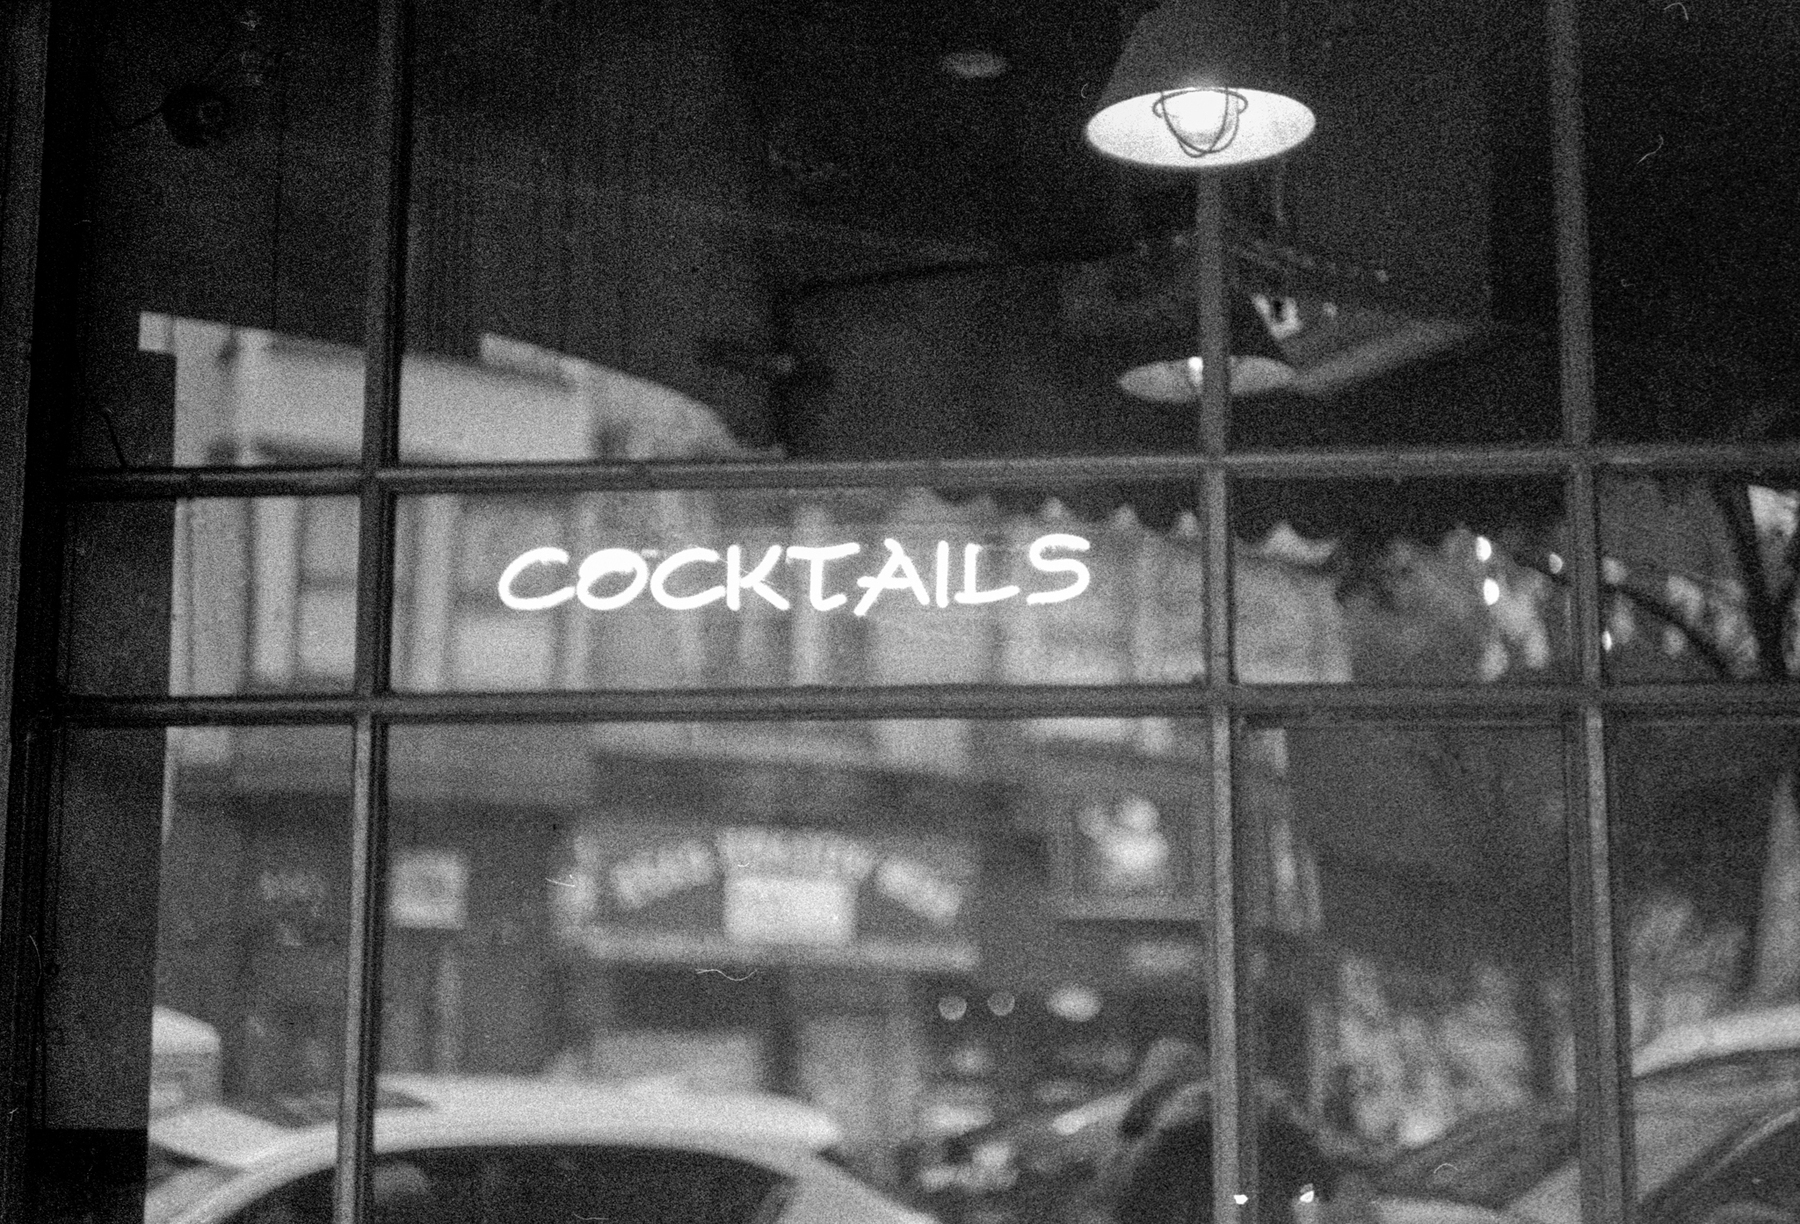 a scan of a black and white photo showing a neon sign that reads Cocktails in the window of a divey bar